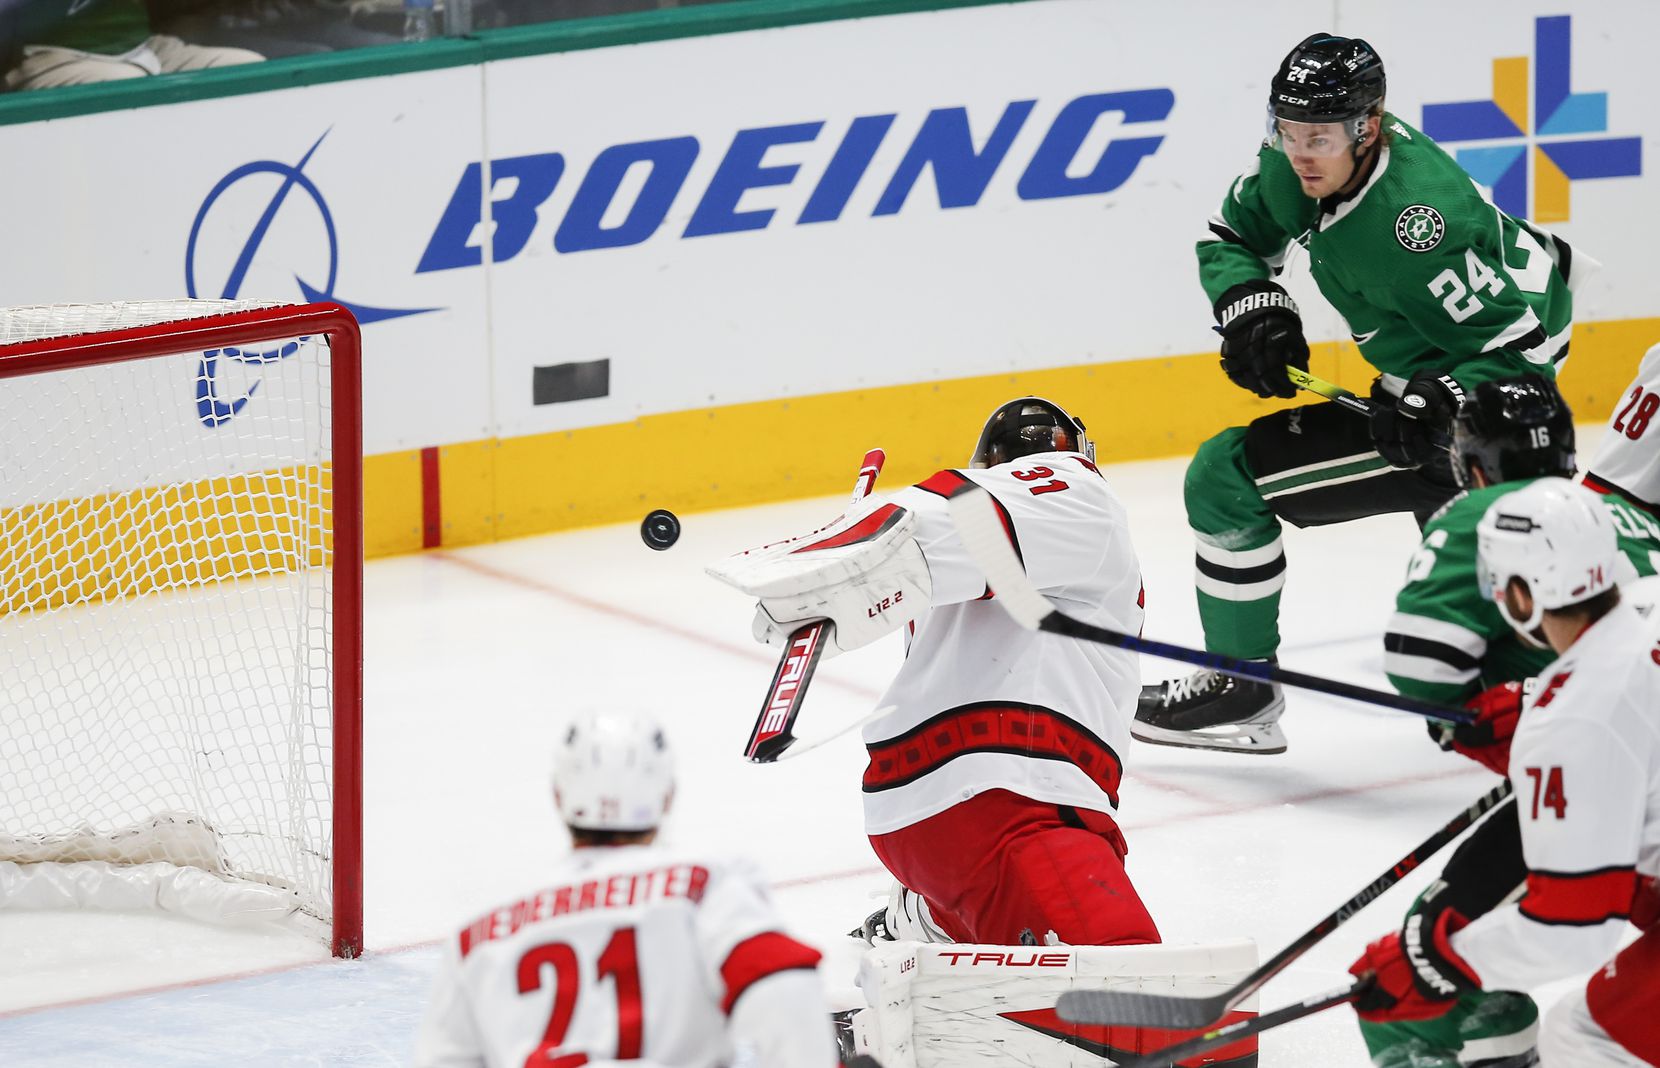 Dallas Stars forward Roope Hintz (24) shoots the puck past Carolina Hurricanes goaltender Frederik Andersen (31) for a goal during the first period of an NHL hockey game in Dallas, Tuesday, November 30, 2021. (Brandon Wade/Special Contributor)